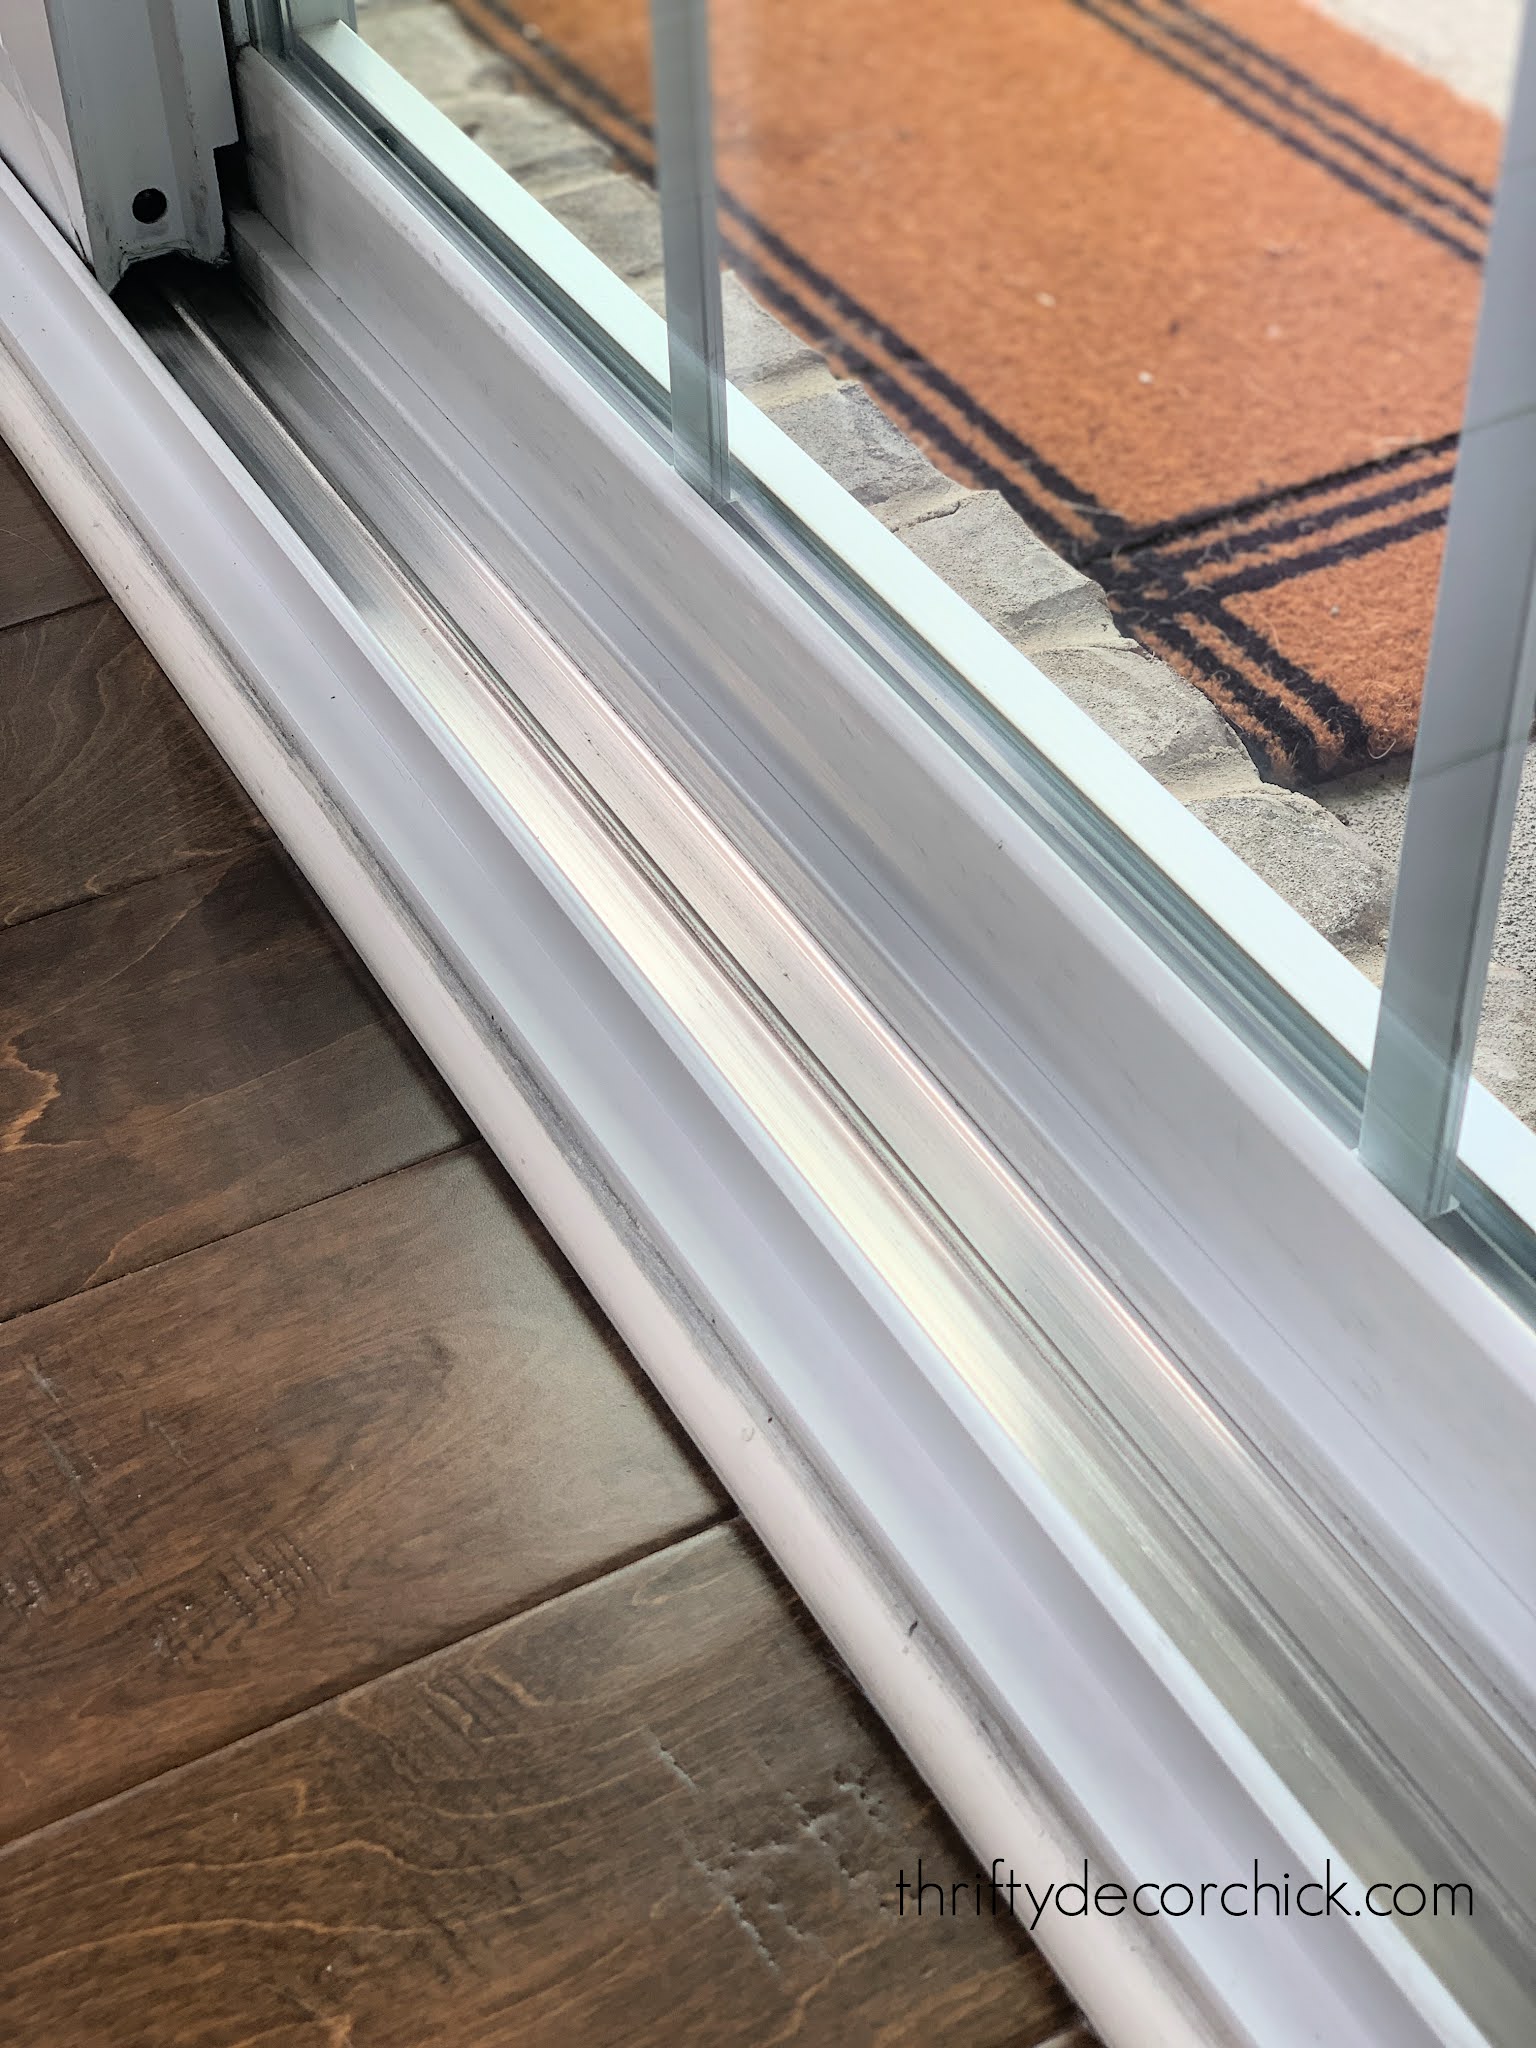 How to clean filthy window tracks and sills | Thrifty Decor Chick